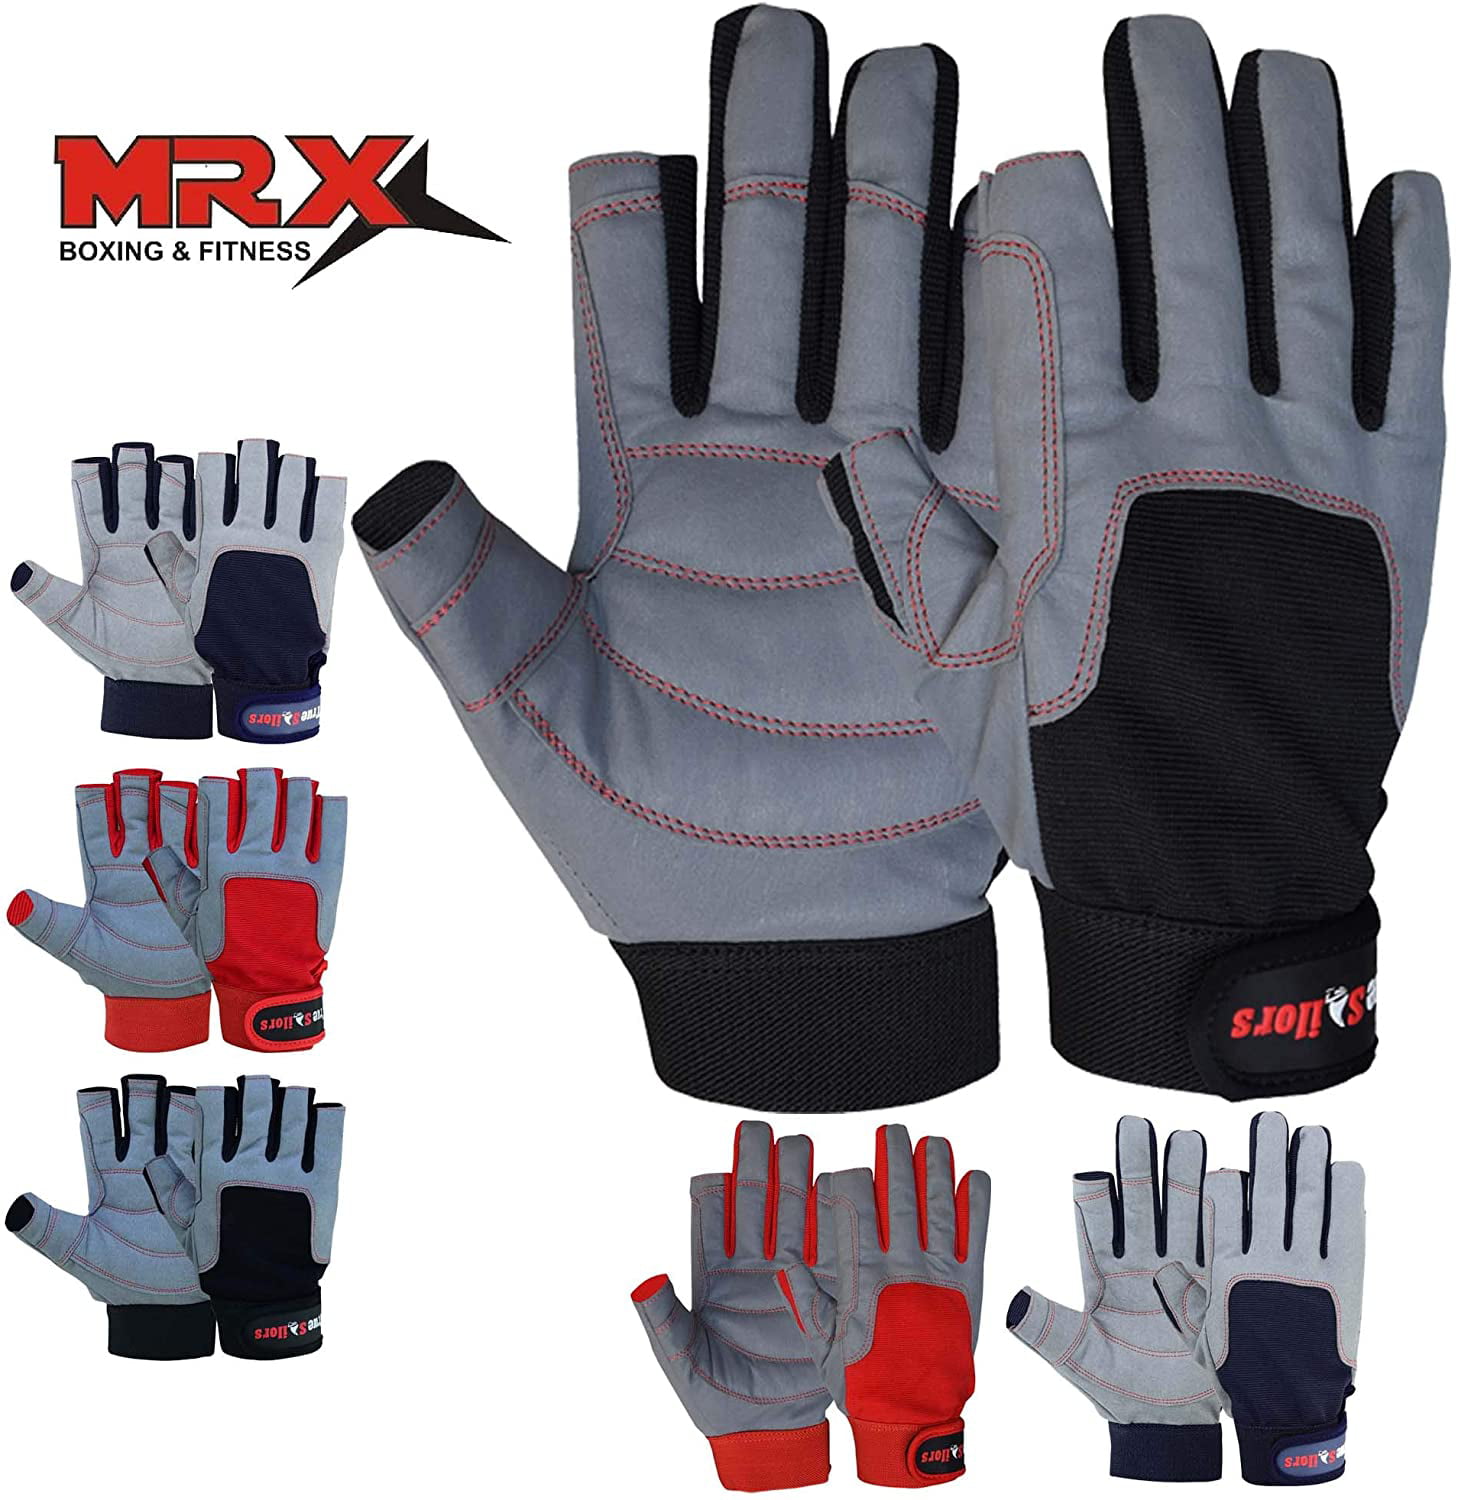 MRX BOXING & FITNESS Sailing Gloves with 3/4 Finger and Grip for Men and Women Workouts and More Blue/Grey Great for Kayaking 